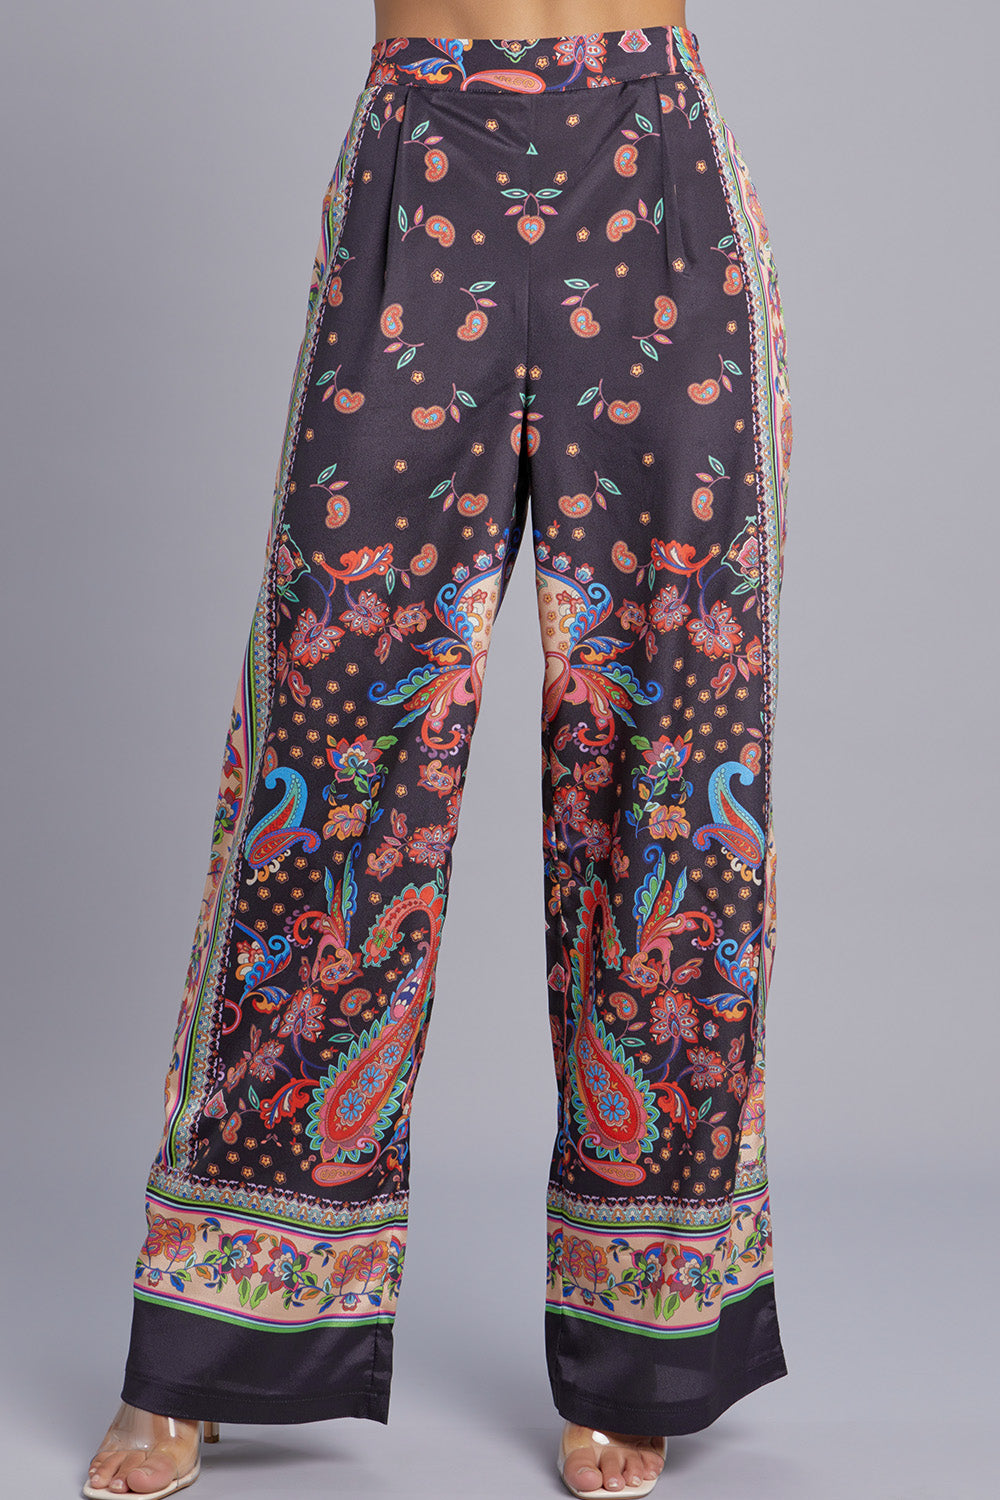 Floral & Paisley Printed Long Sleeve Button Up & Pants Set